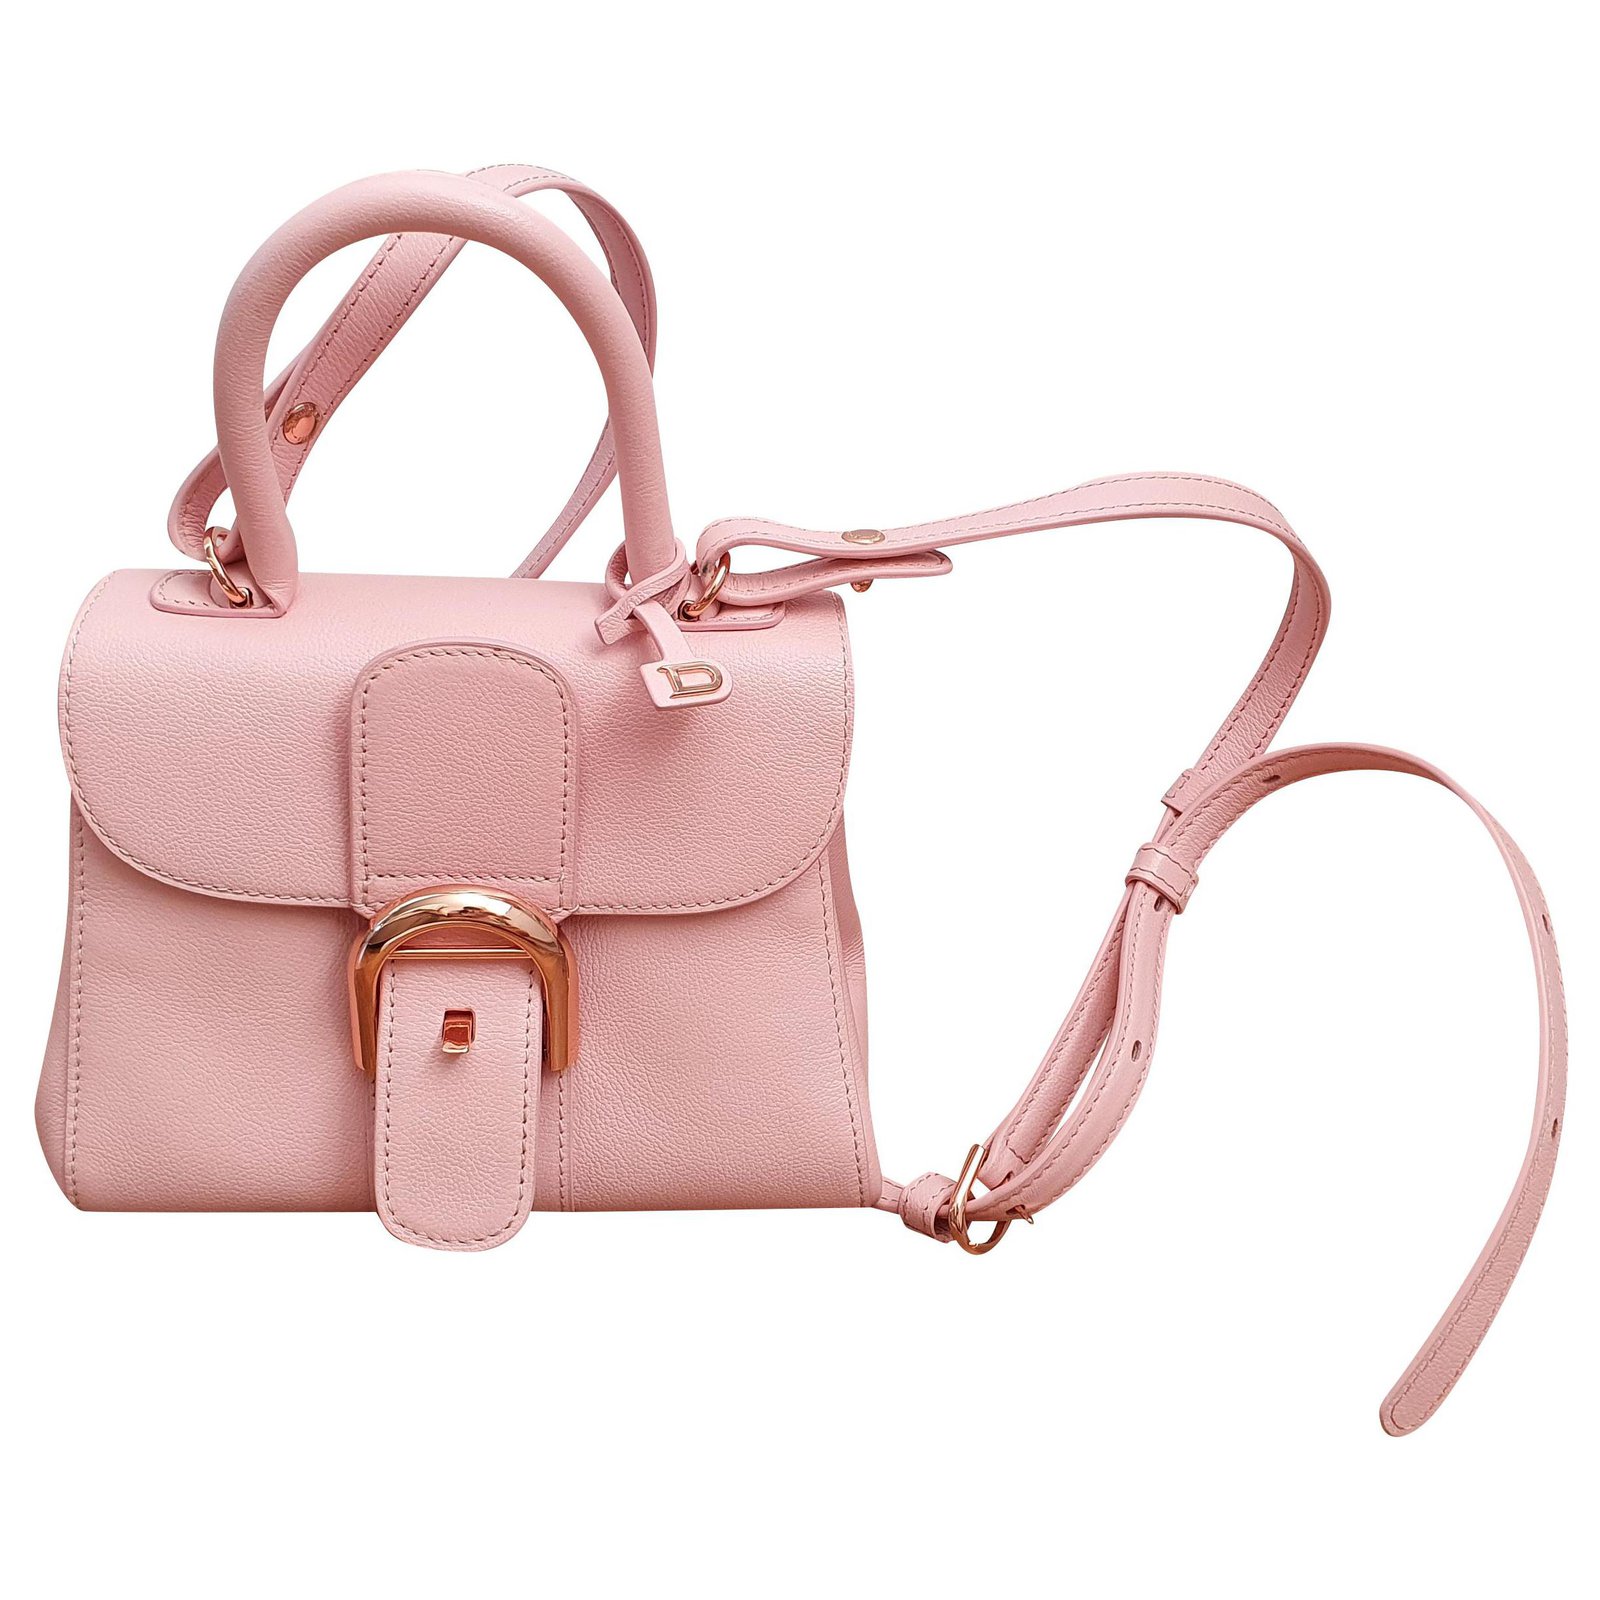 Brillant leather handbag Delvaux Pink in Leather - 21962319